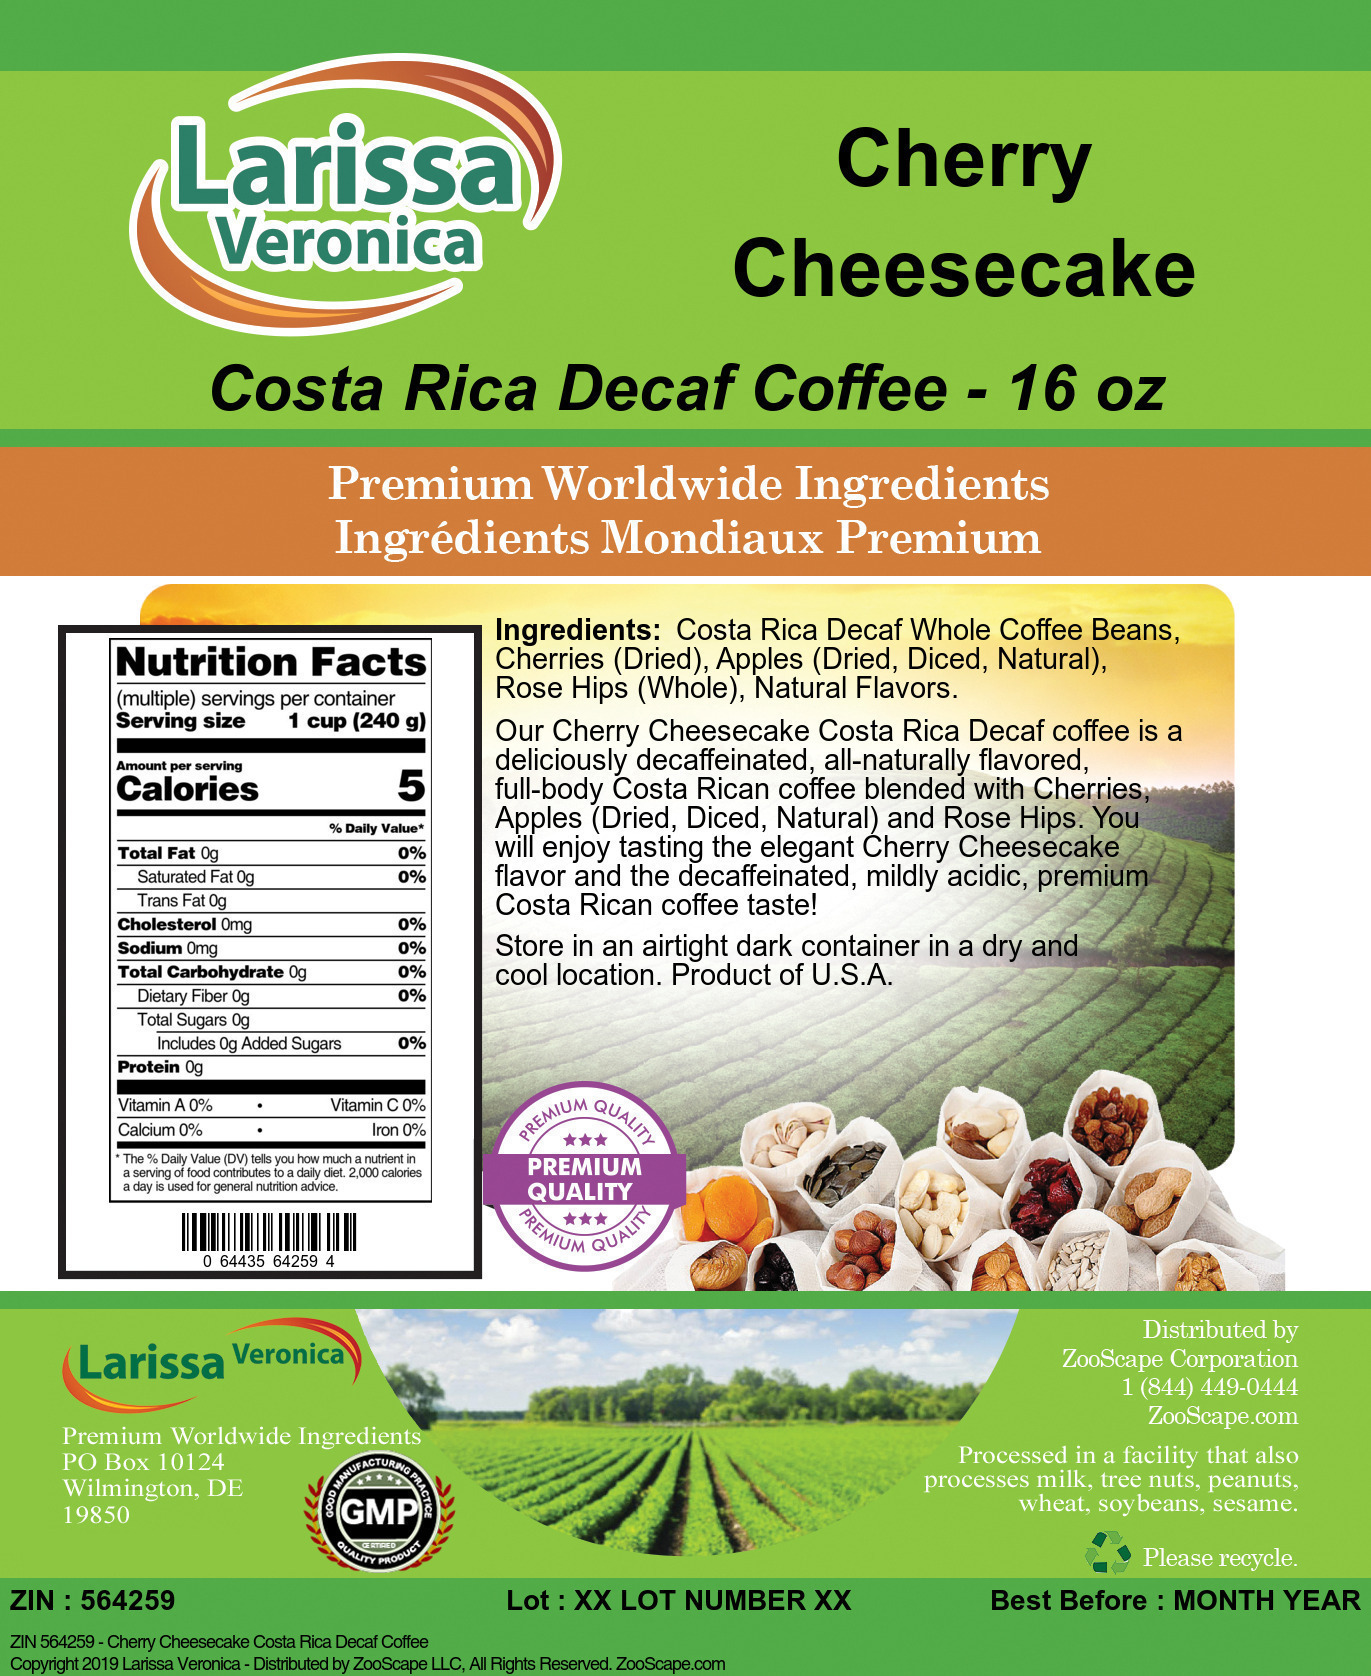 Cherry Cheesecake Costa Rica Decaf Coffee - Label